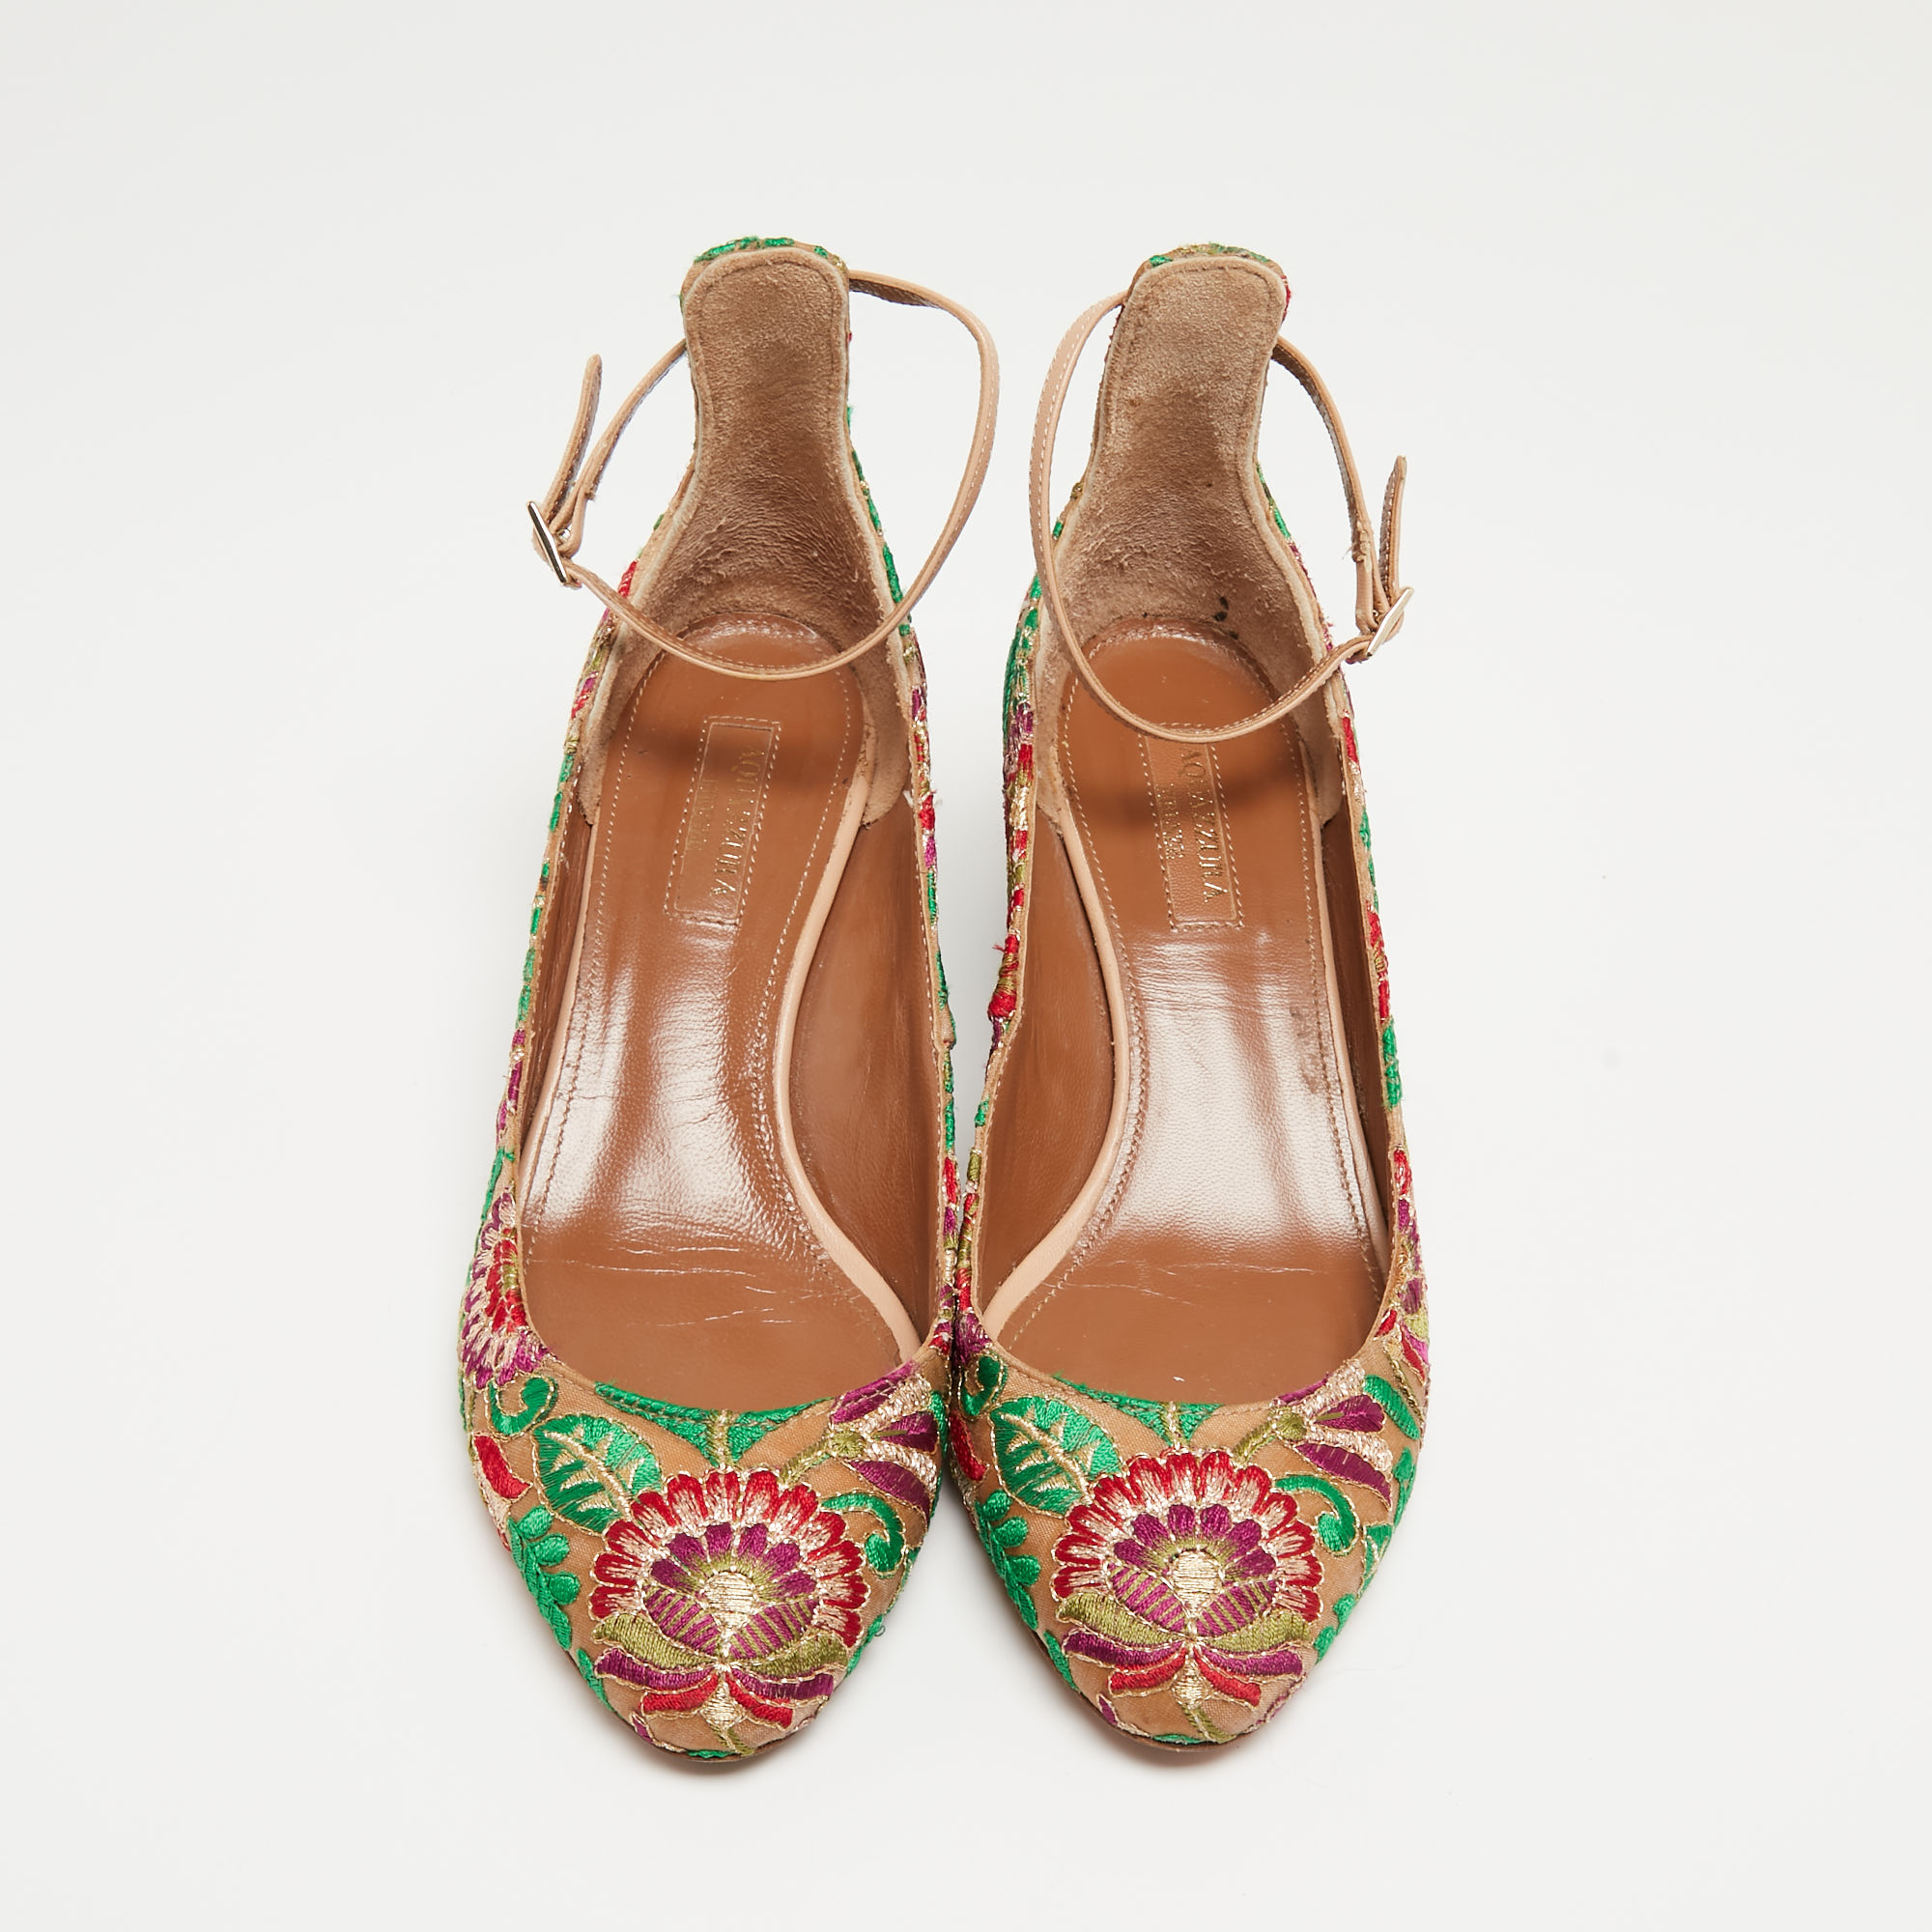 Aquazzura Multicolor Leather And Mesh Embroidered Christy Pumps Size 36.5